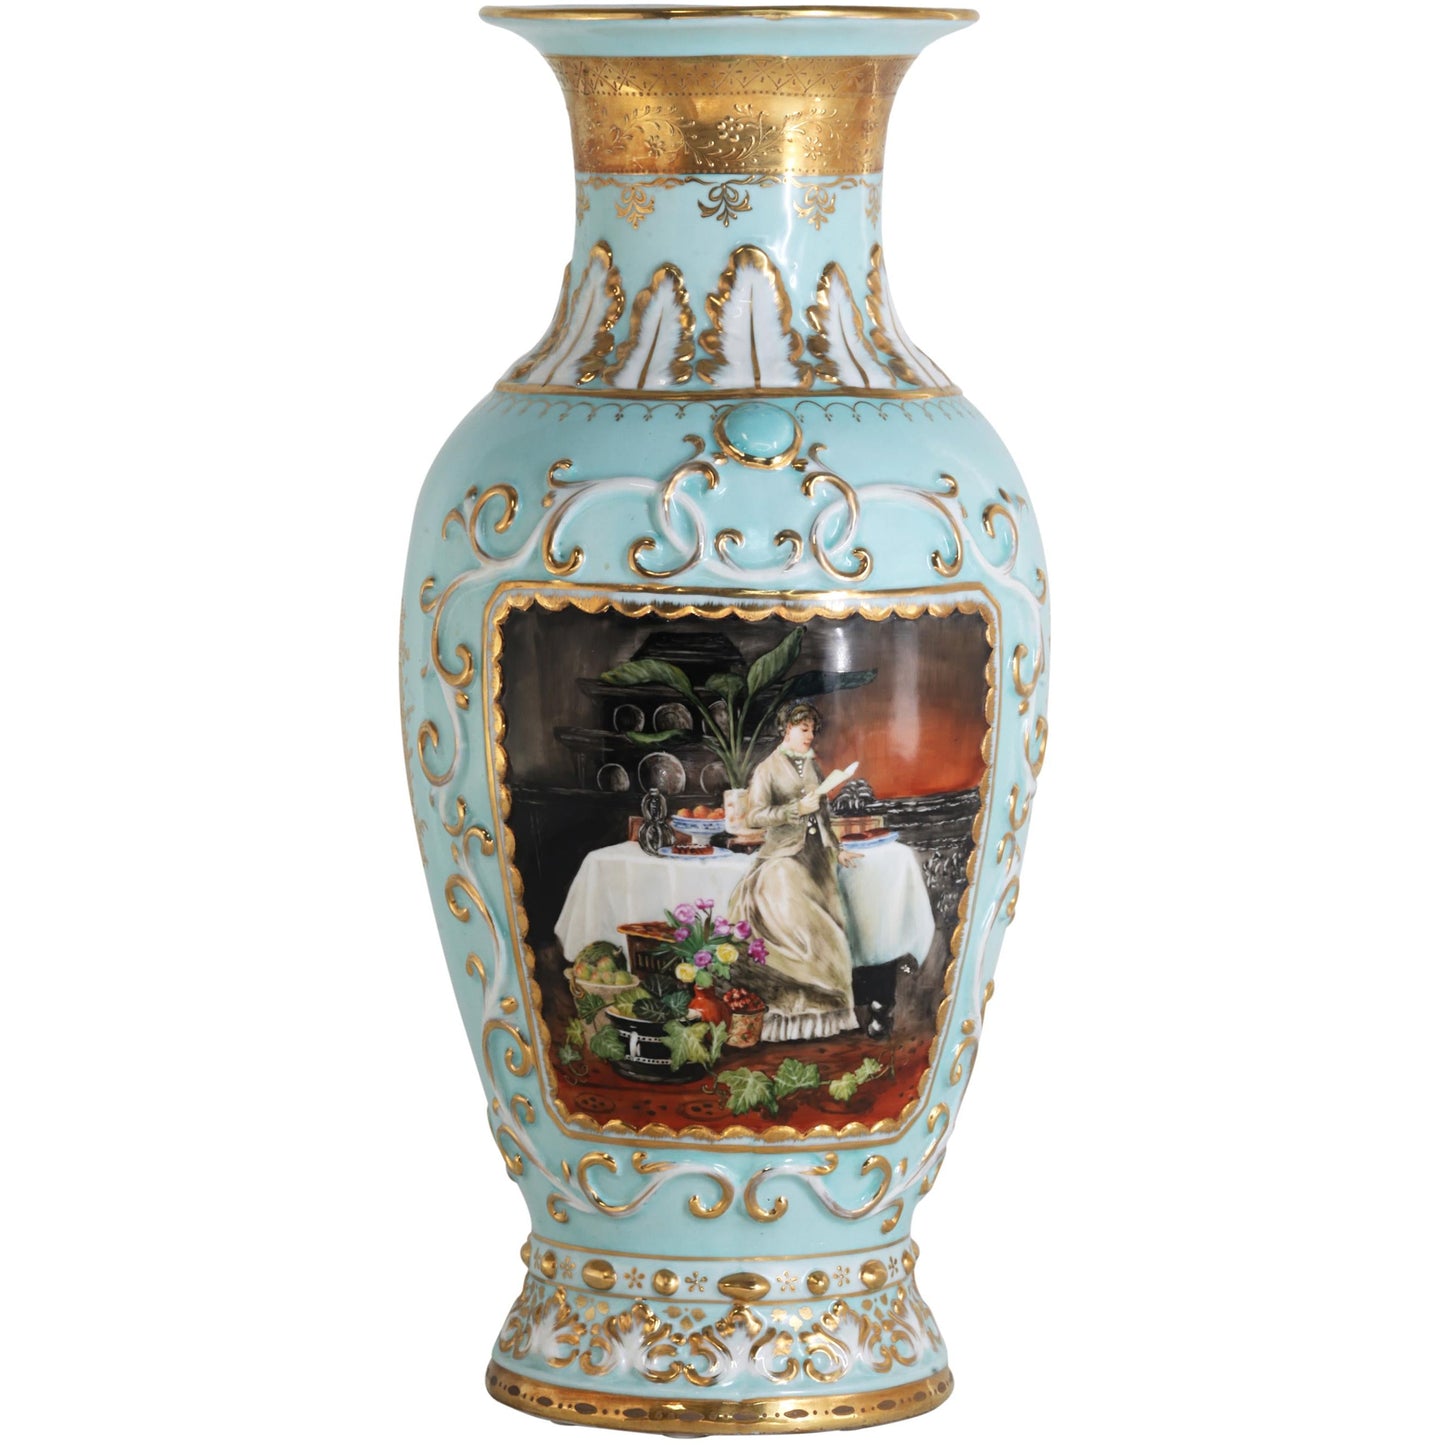 Hand-painted Motif Teal Rococo Porcelain Vase